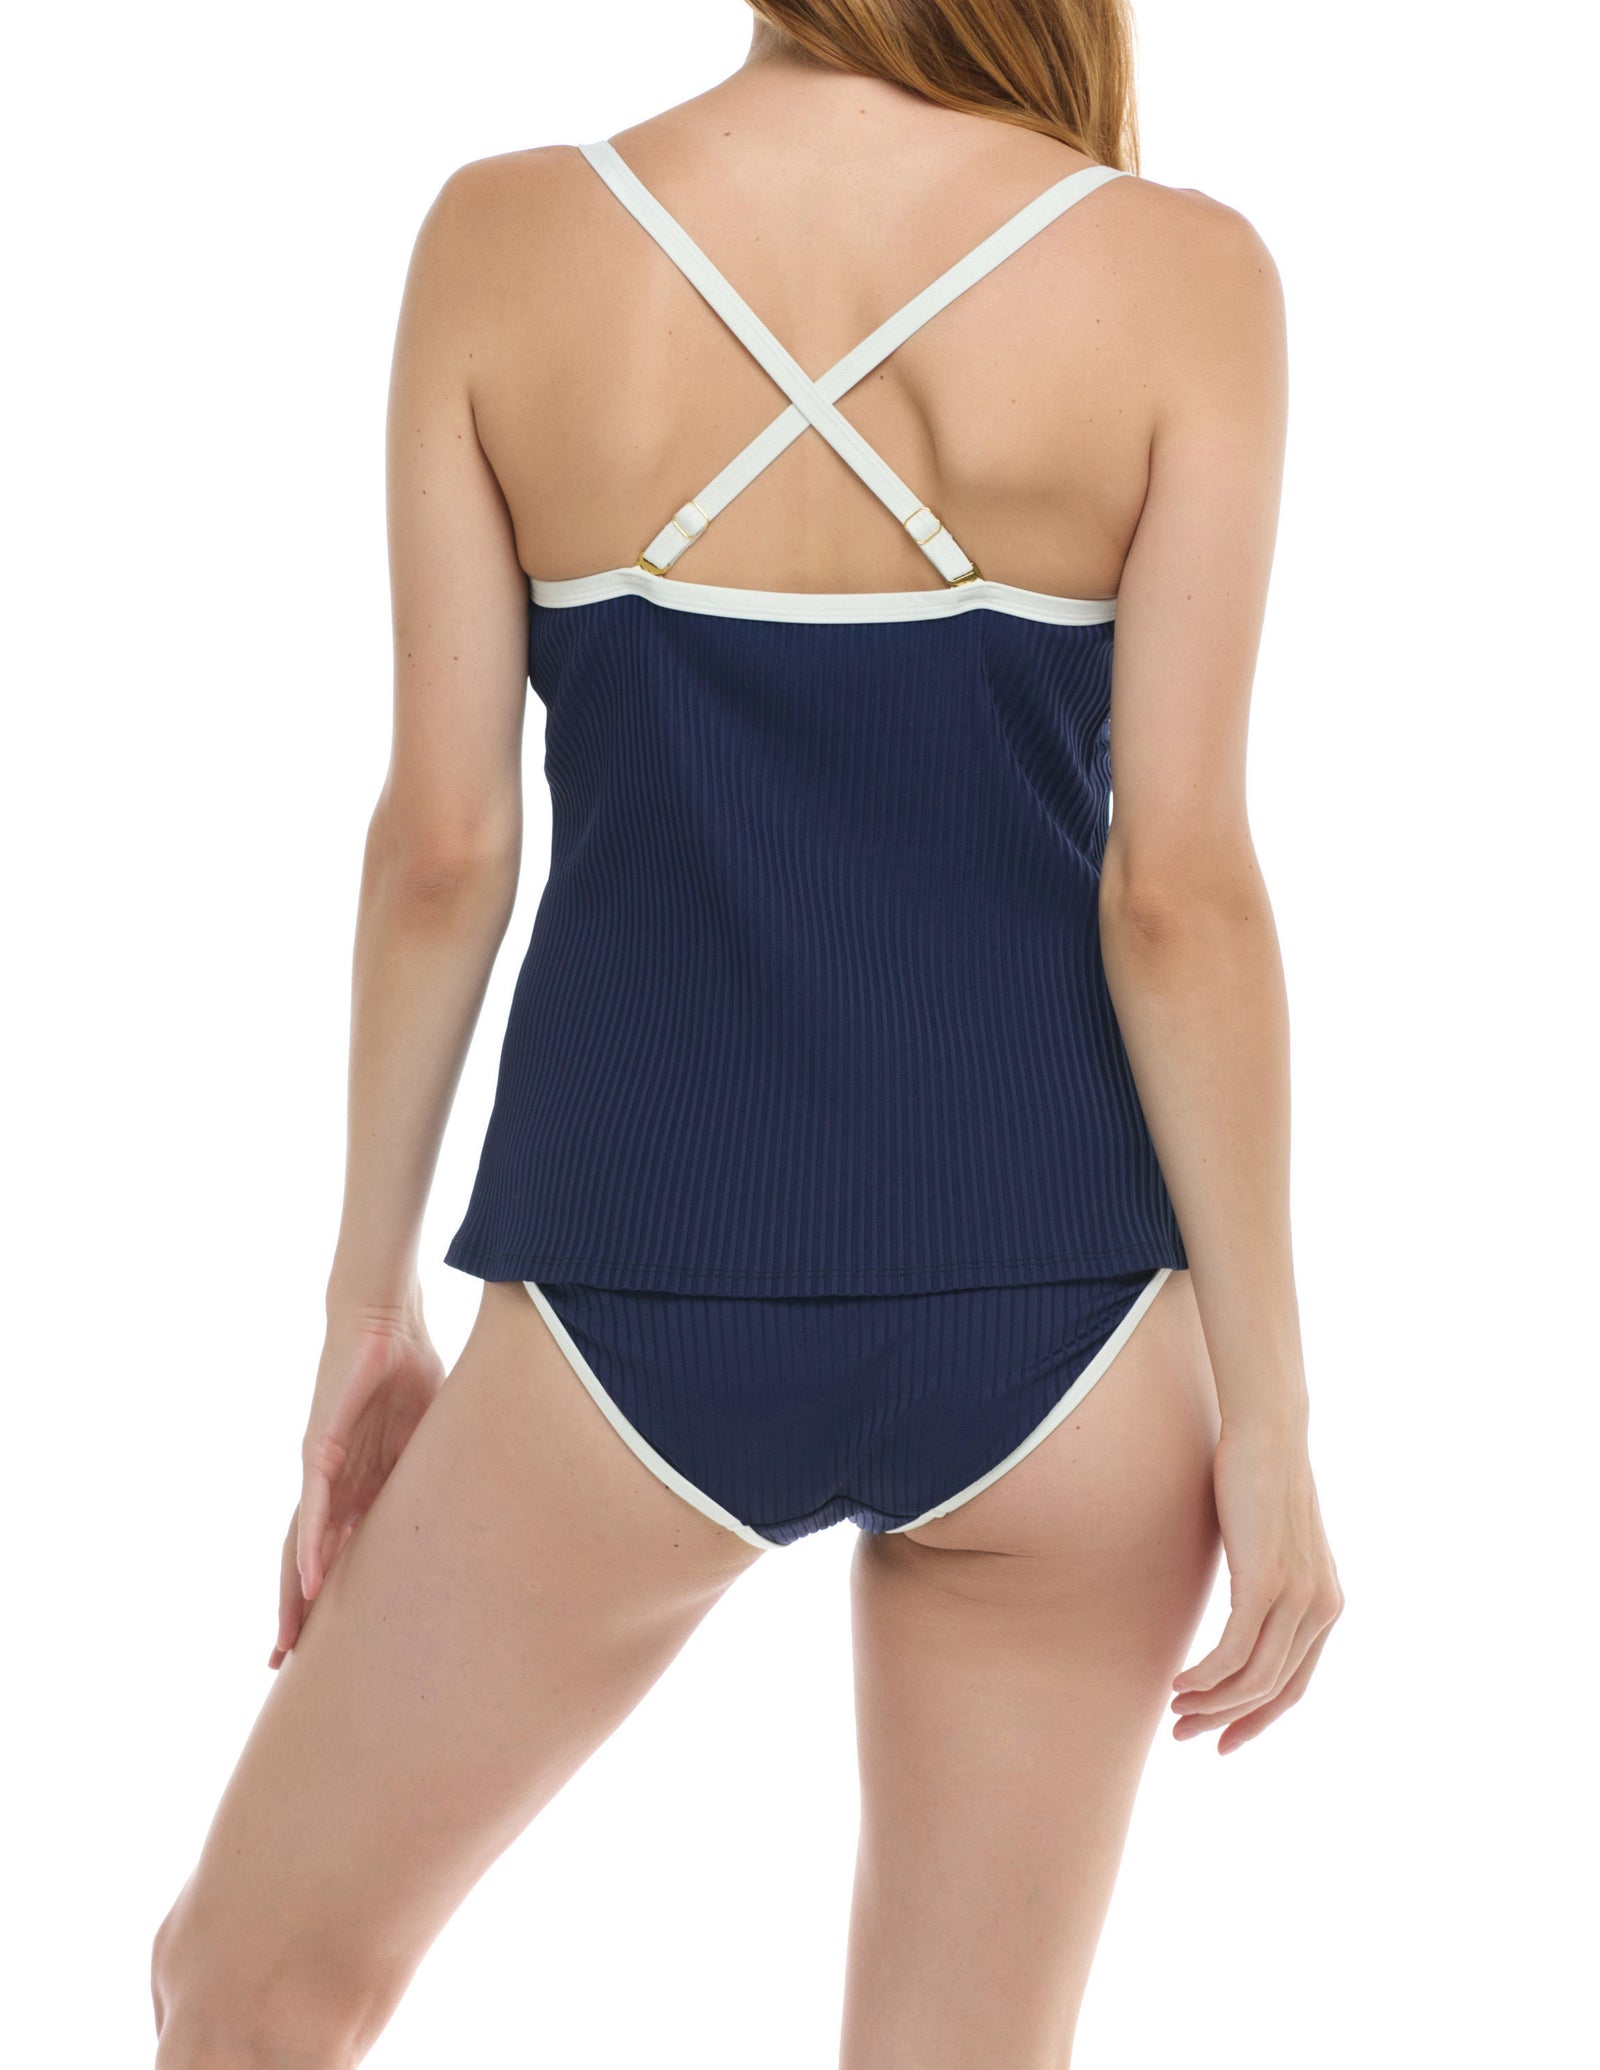 MAU LOA COLLECTION: PIPER  V-Neck Tankini  Removable Soft Cups, Ribbed Fabric, Contour Shelf Bra, Looser Fit, 2-Way Adjustable Straps   Product#: SK736181